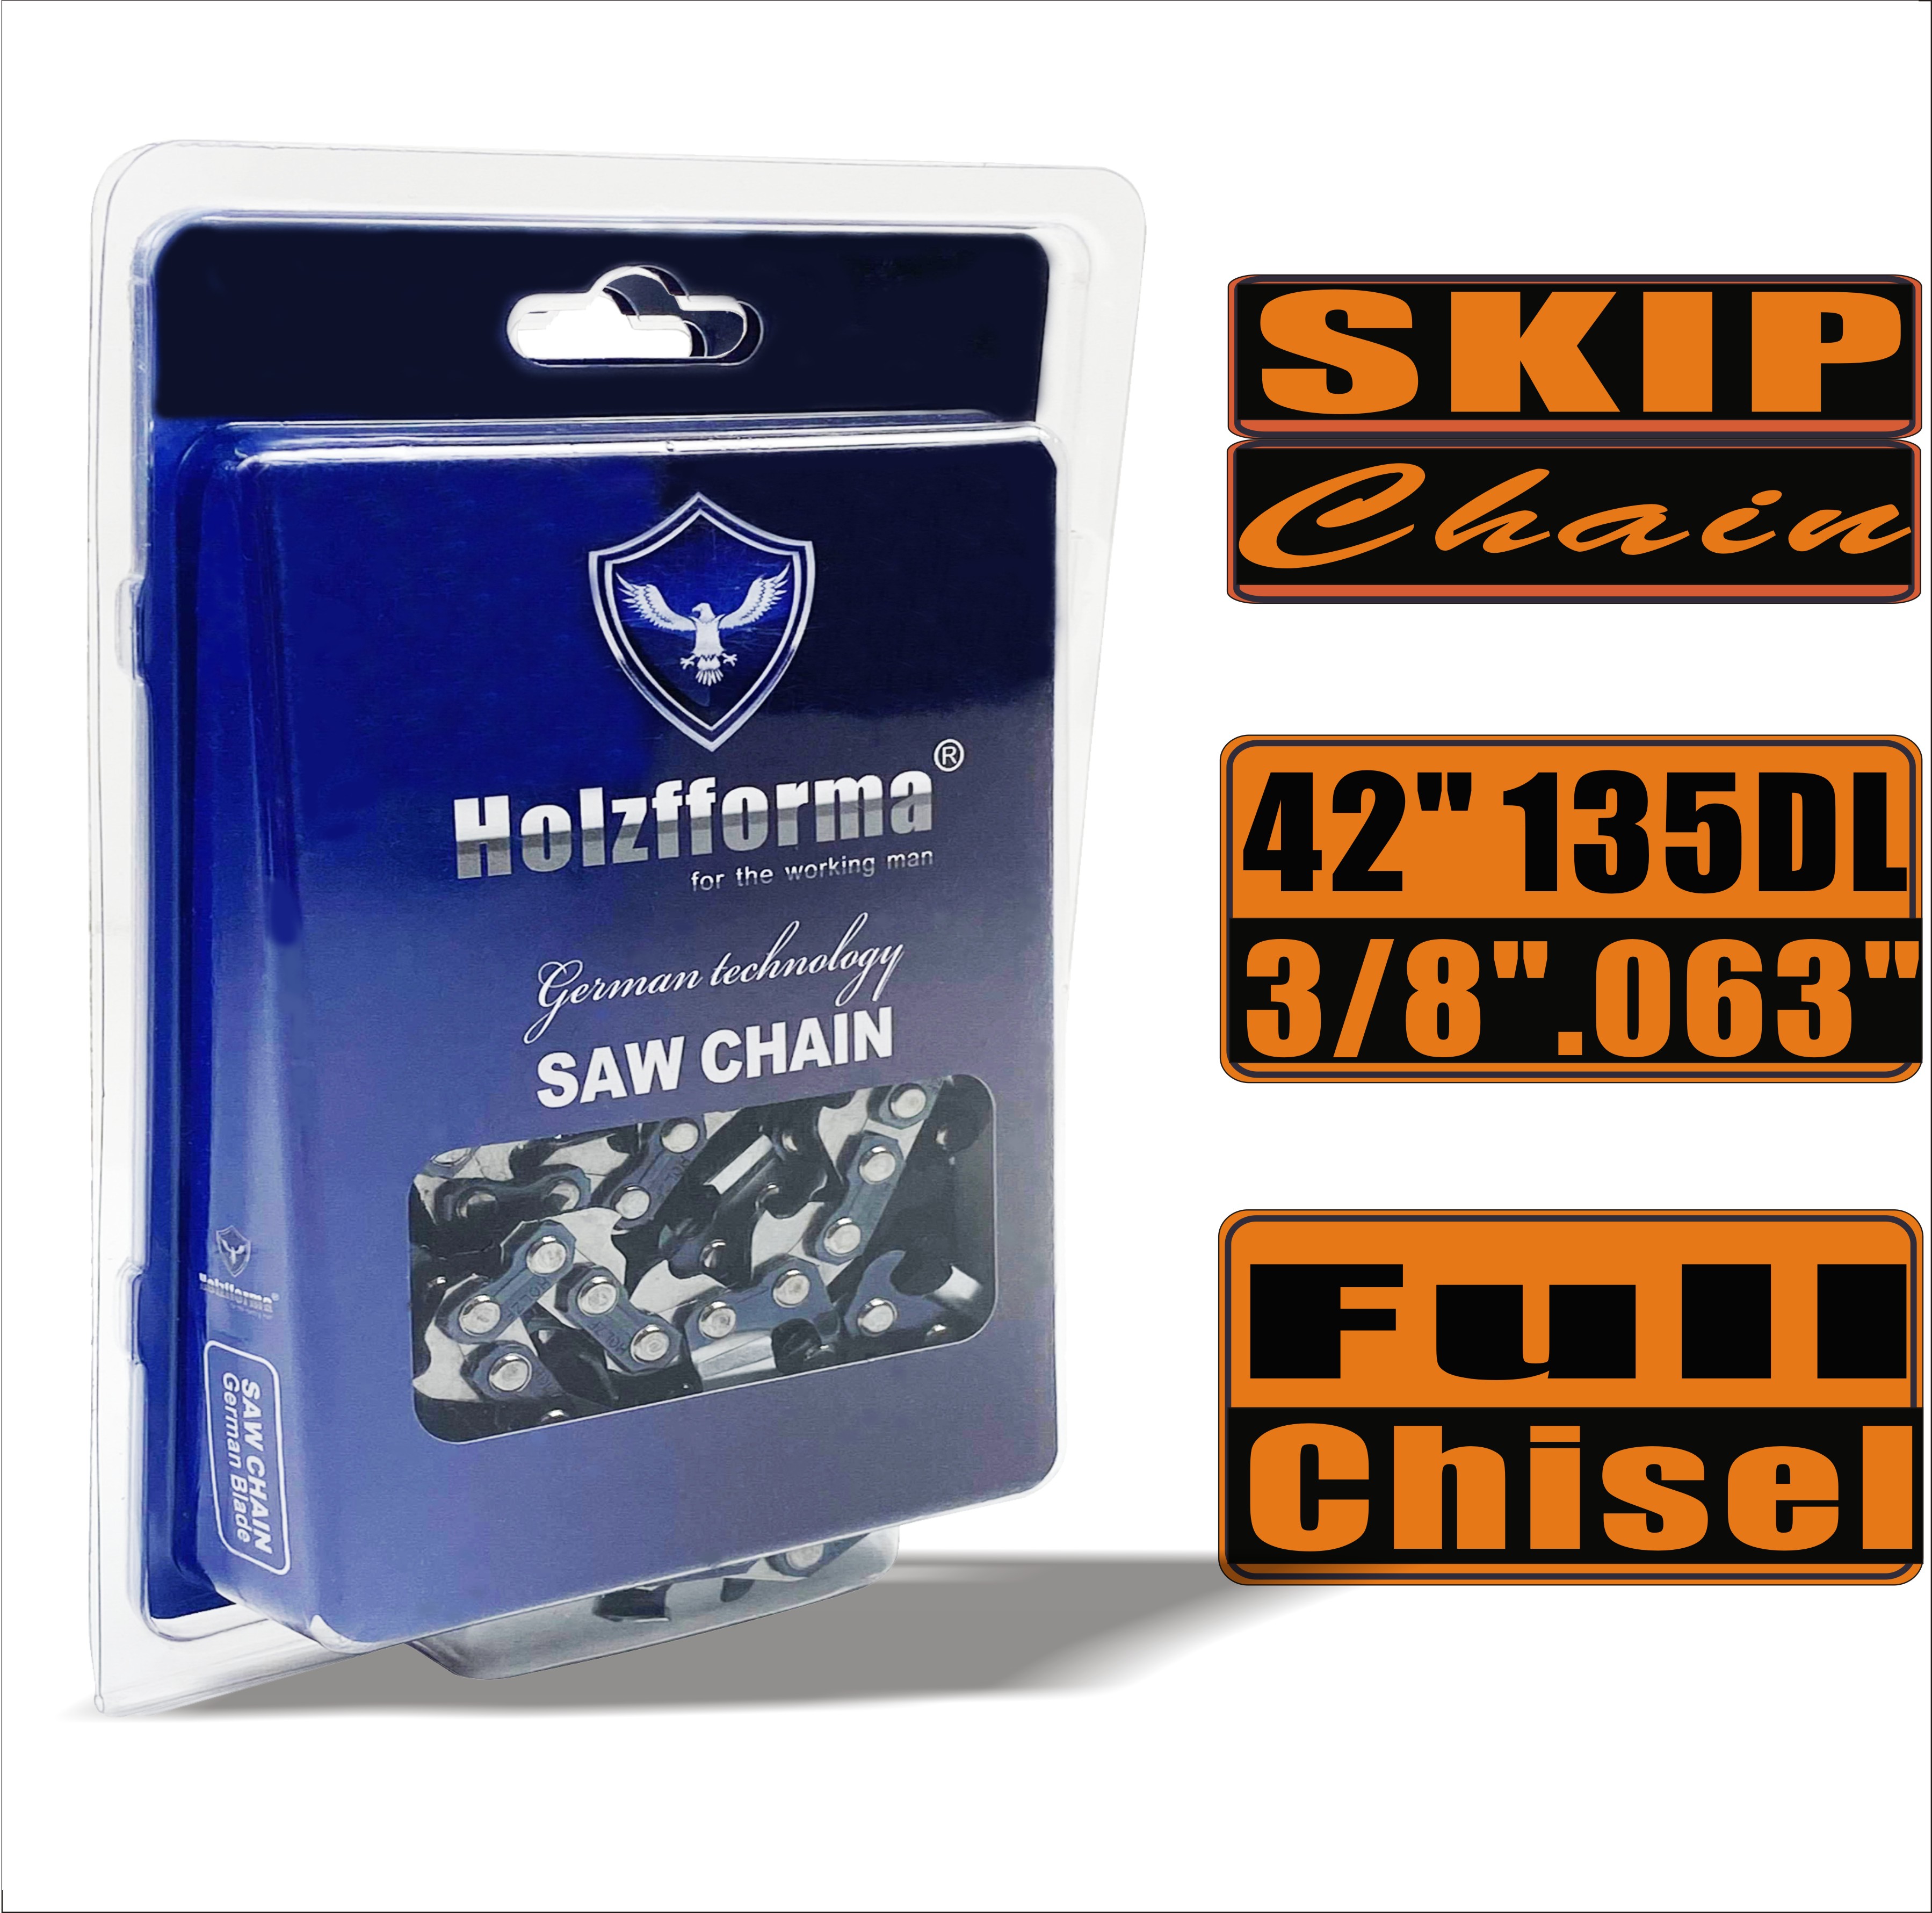 Holzfforma® Skip Chain Full Chisel .3/8\'\' .063\'\' 42inch 135DL Chainsaw Saw Chain Top Quality German Blades and Links